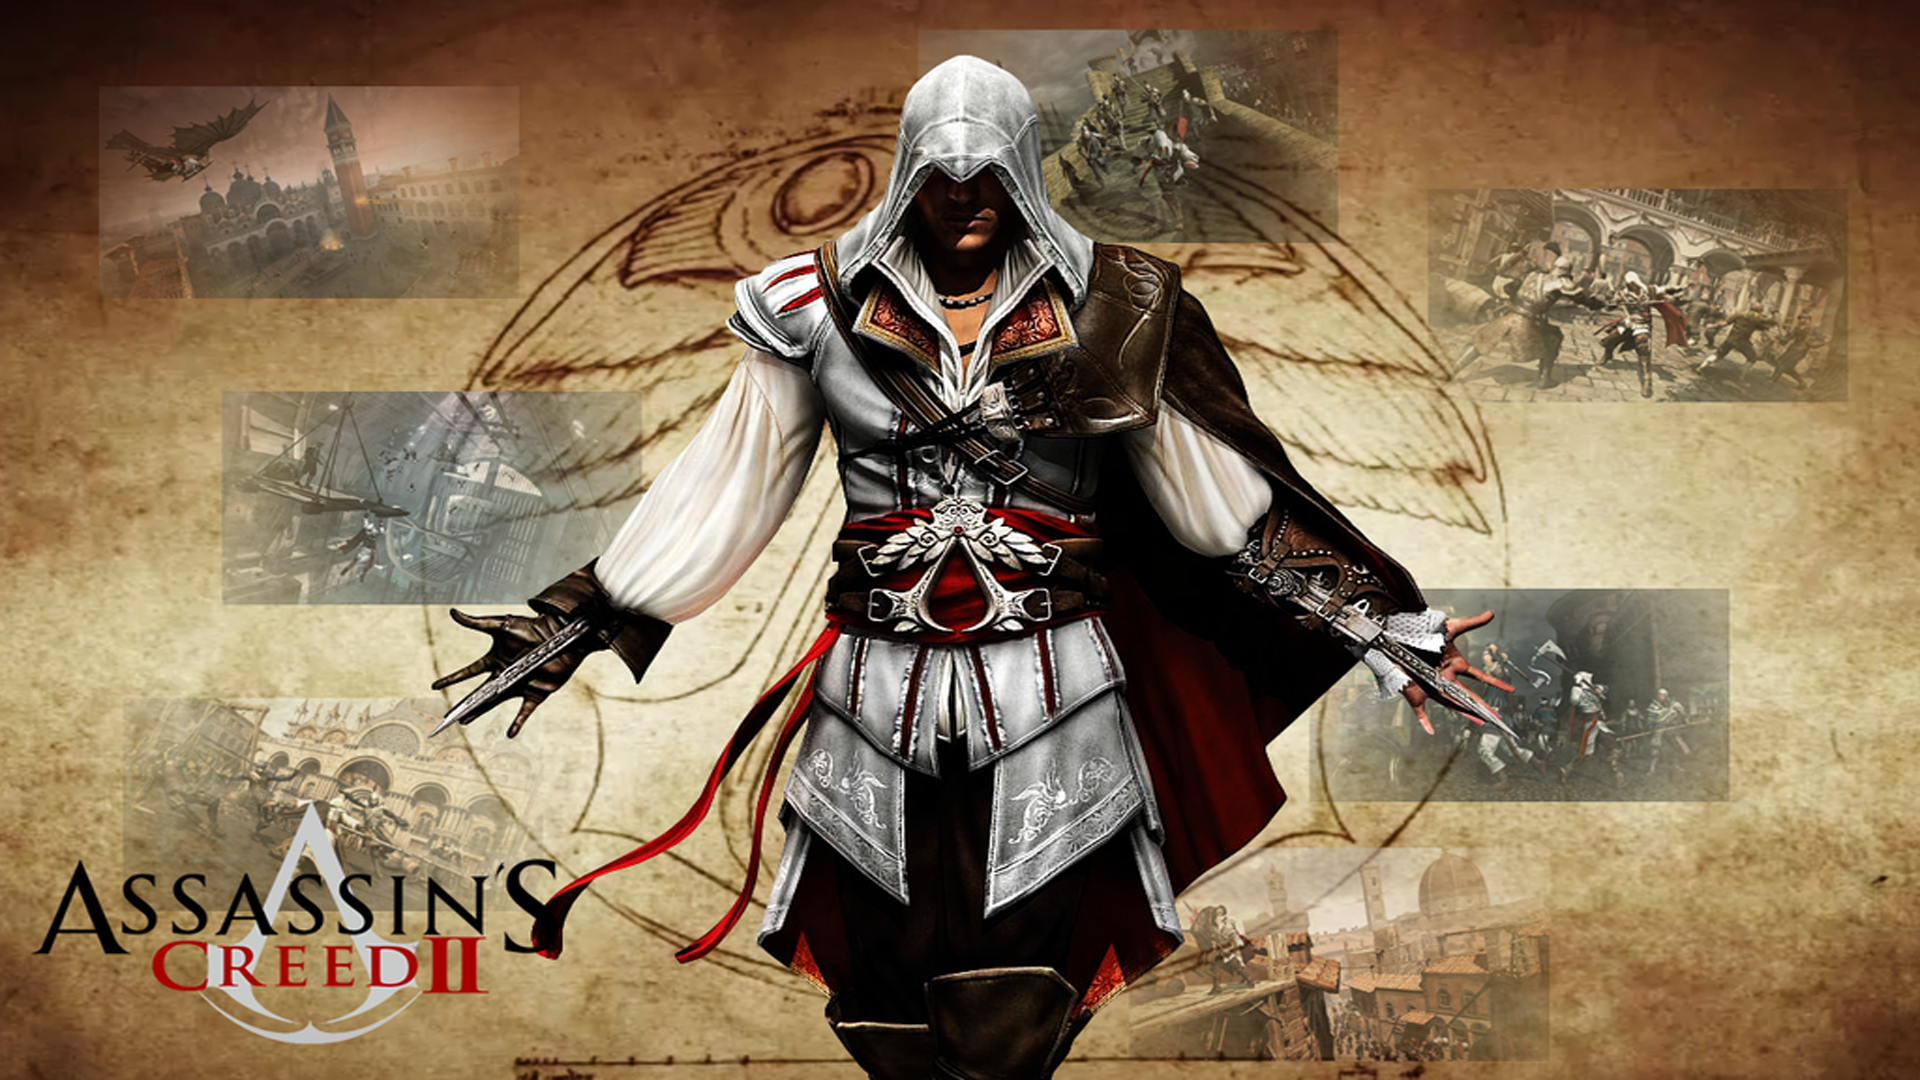 Let’s Play Assassin’s Creed II